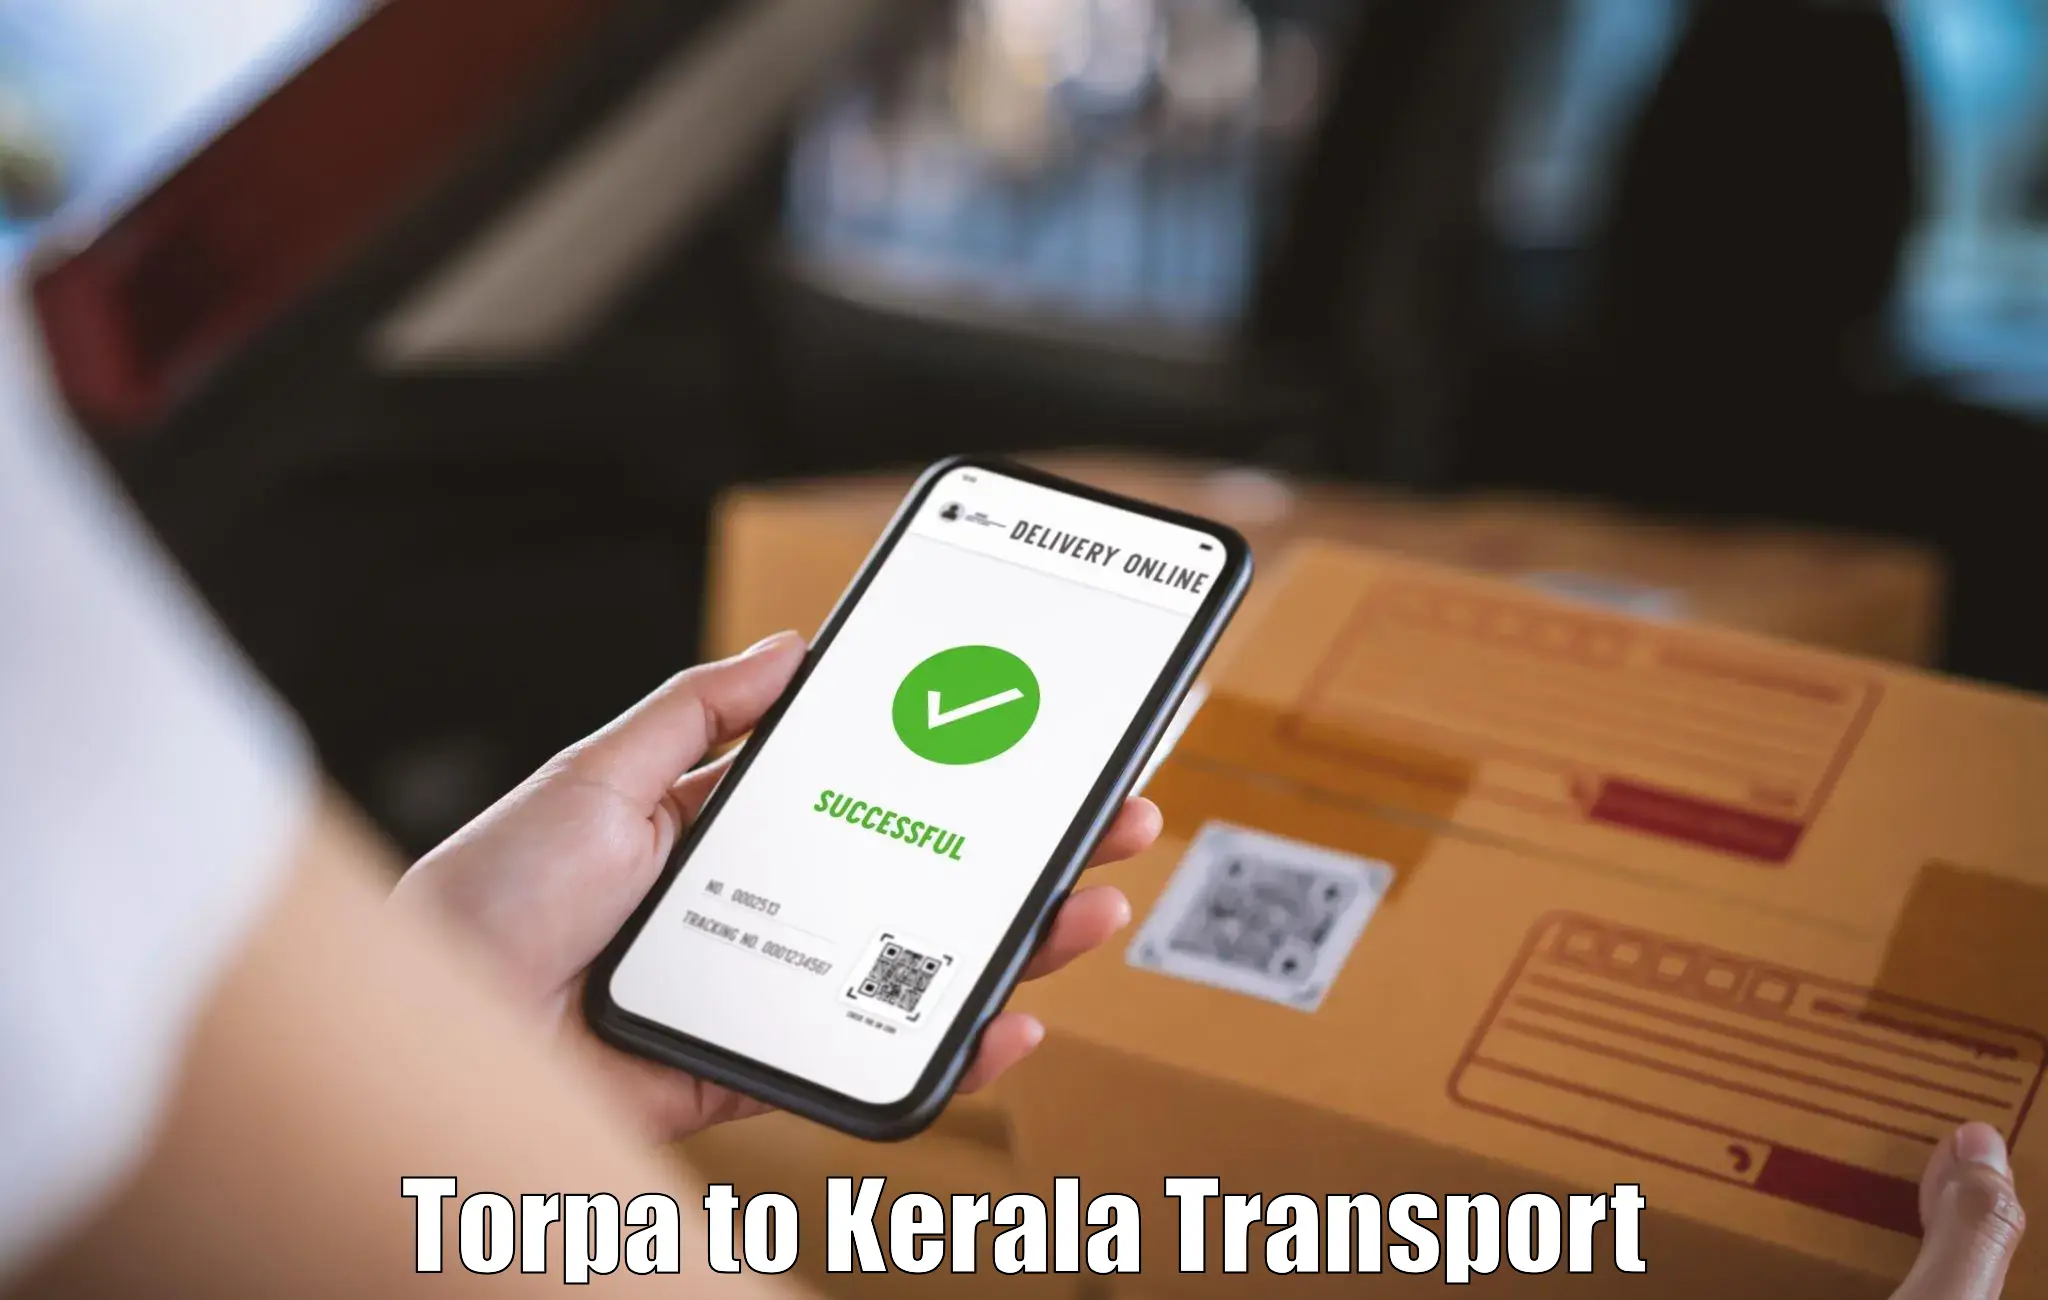 All India transport service Torpa to Kannur